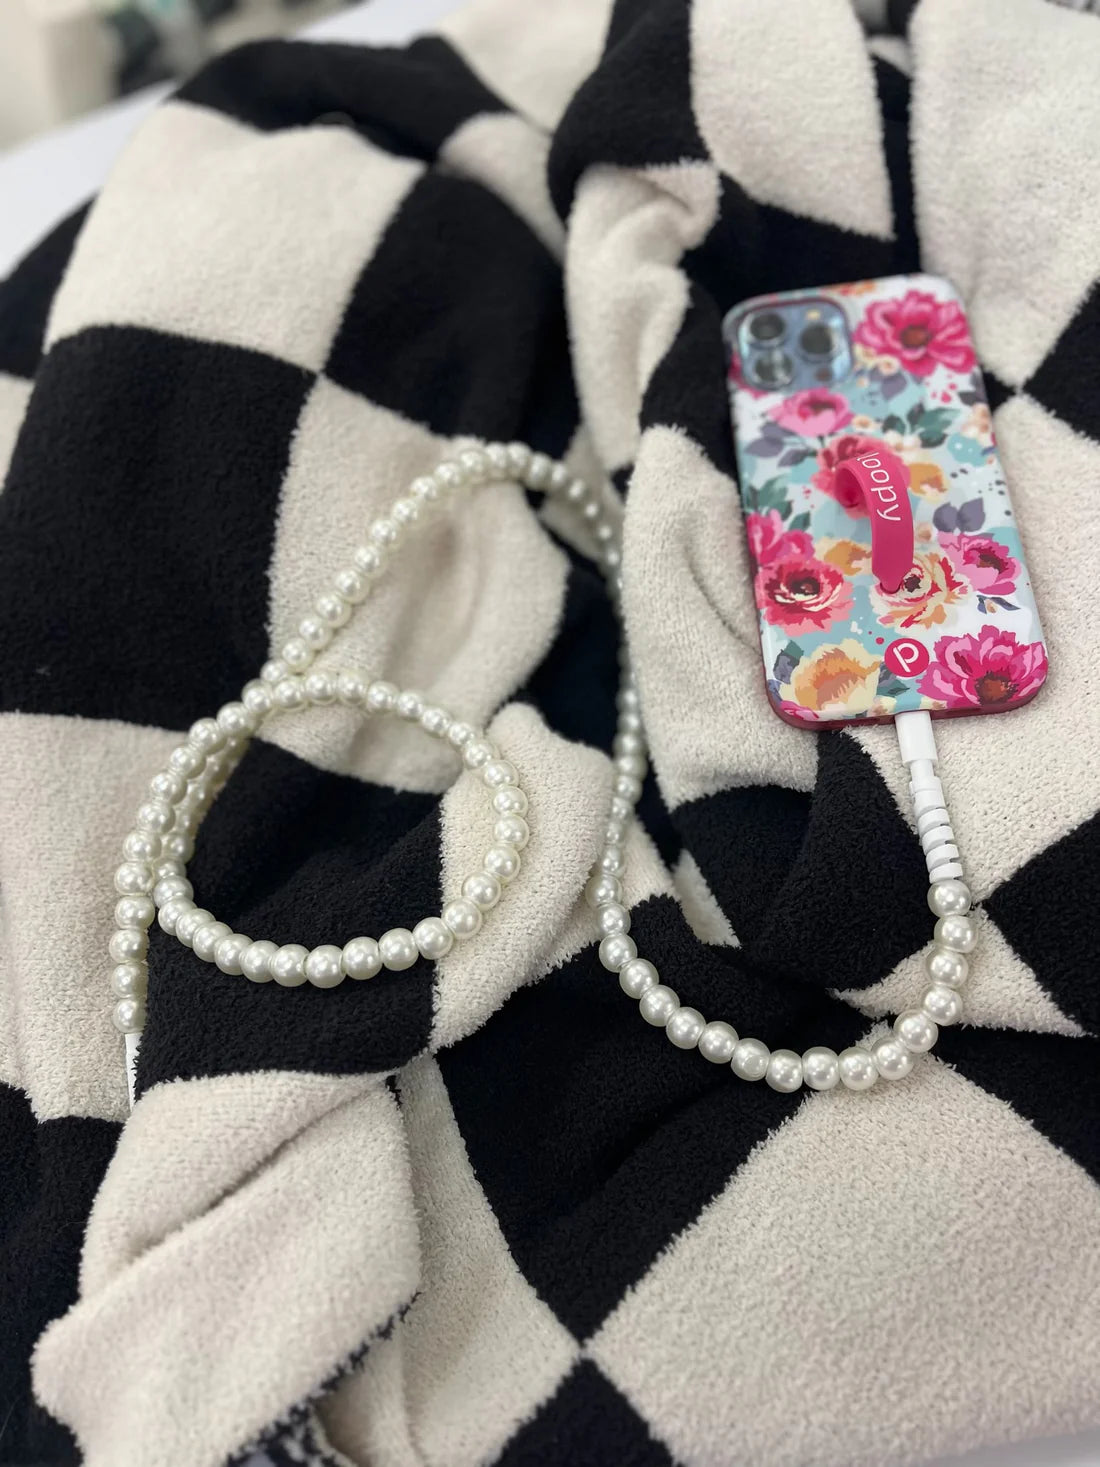 Beaded iPhone Charger